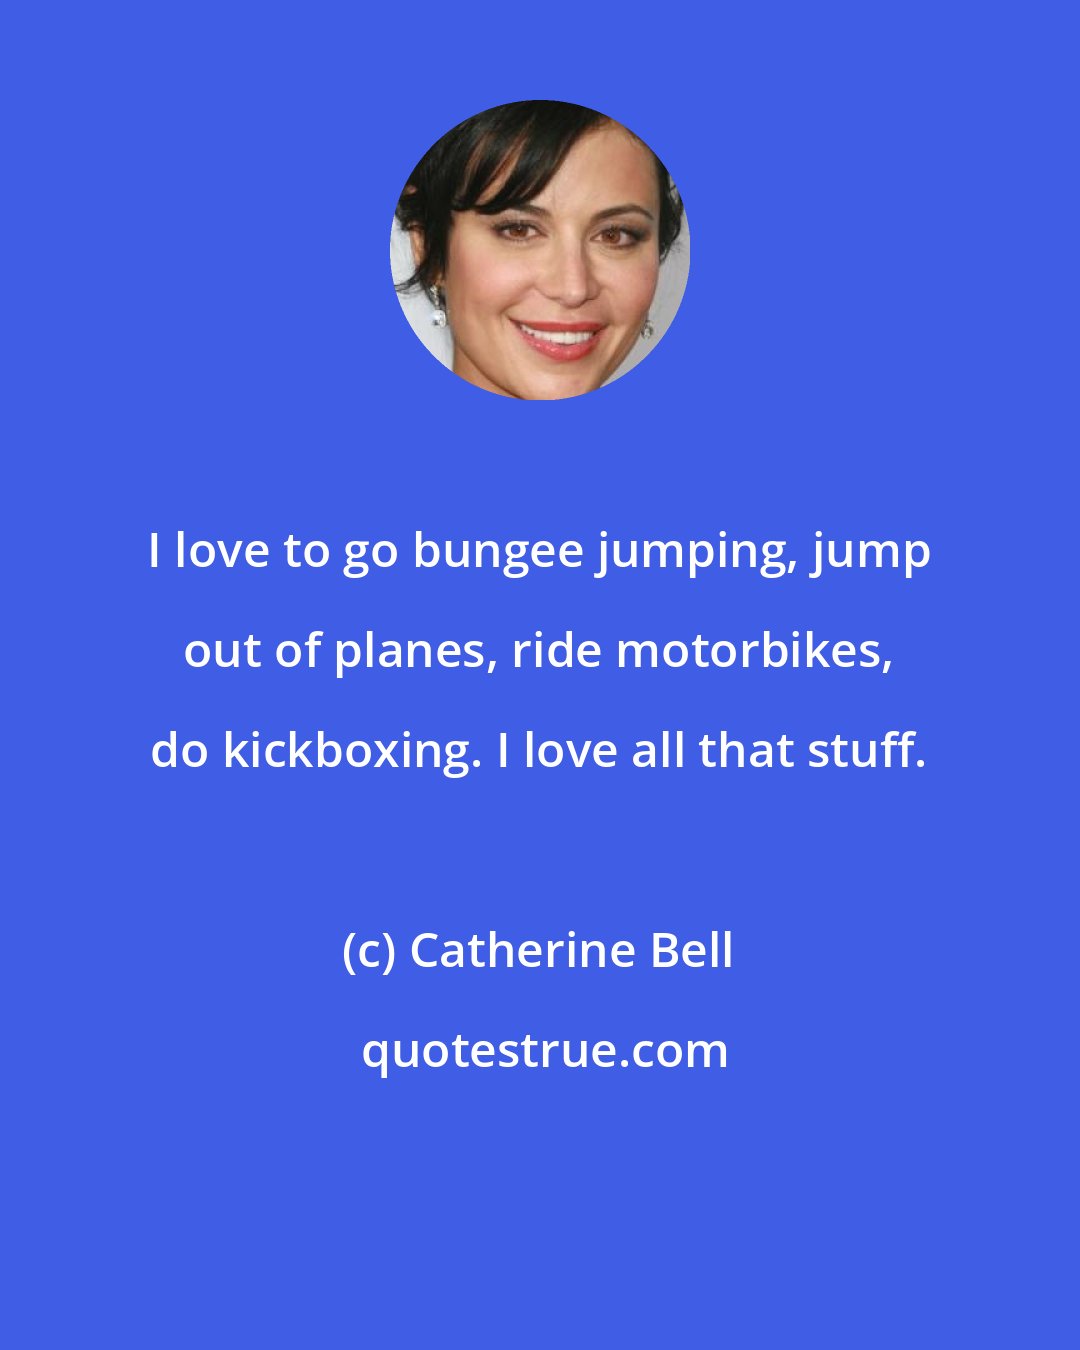 Catherine Bell: I love to go bungee jumping, jump out of planes, ride motorbikes, do kickboxing. I love all that stuff.